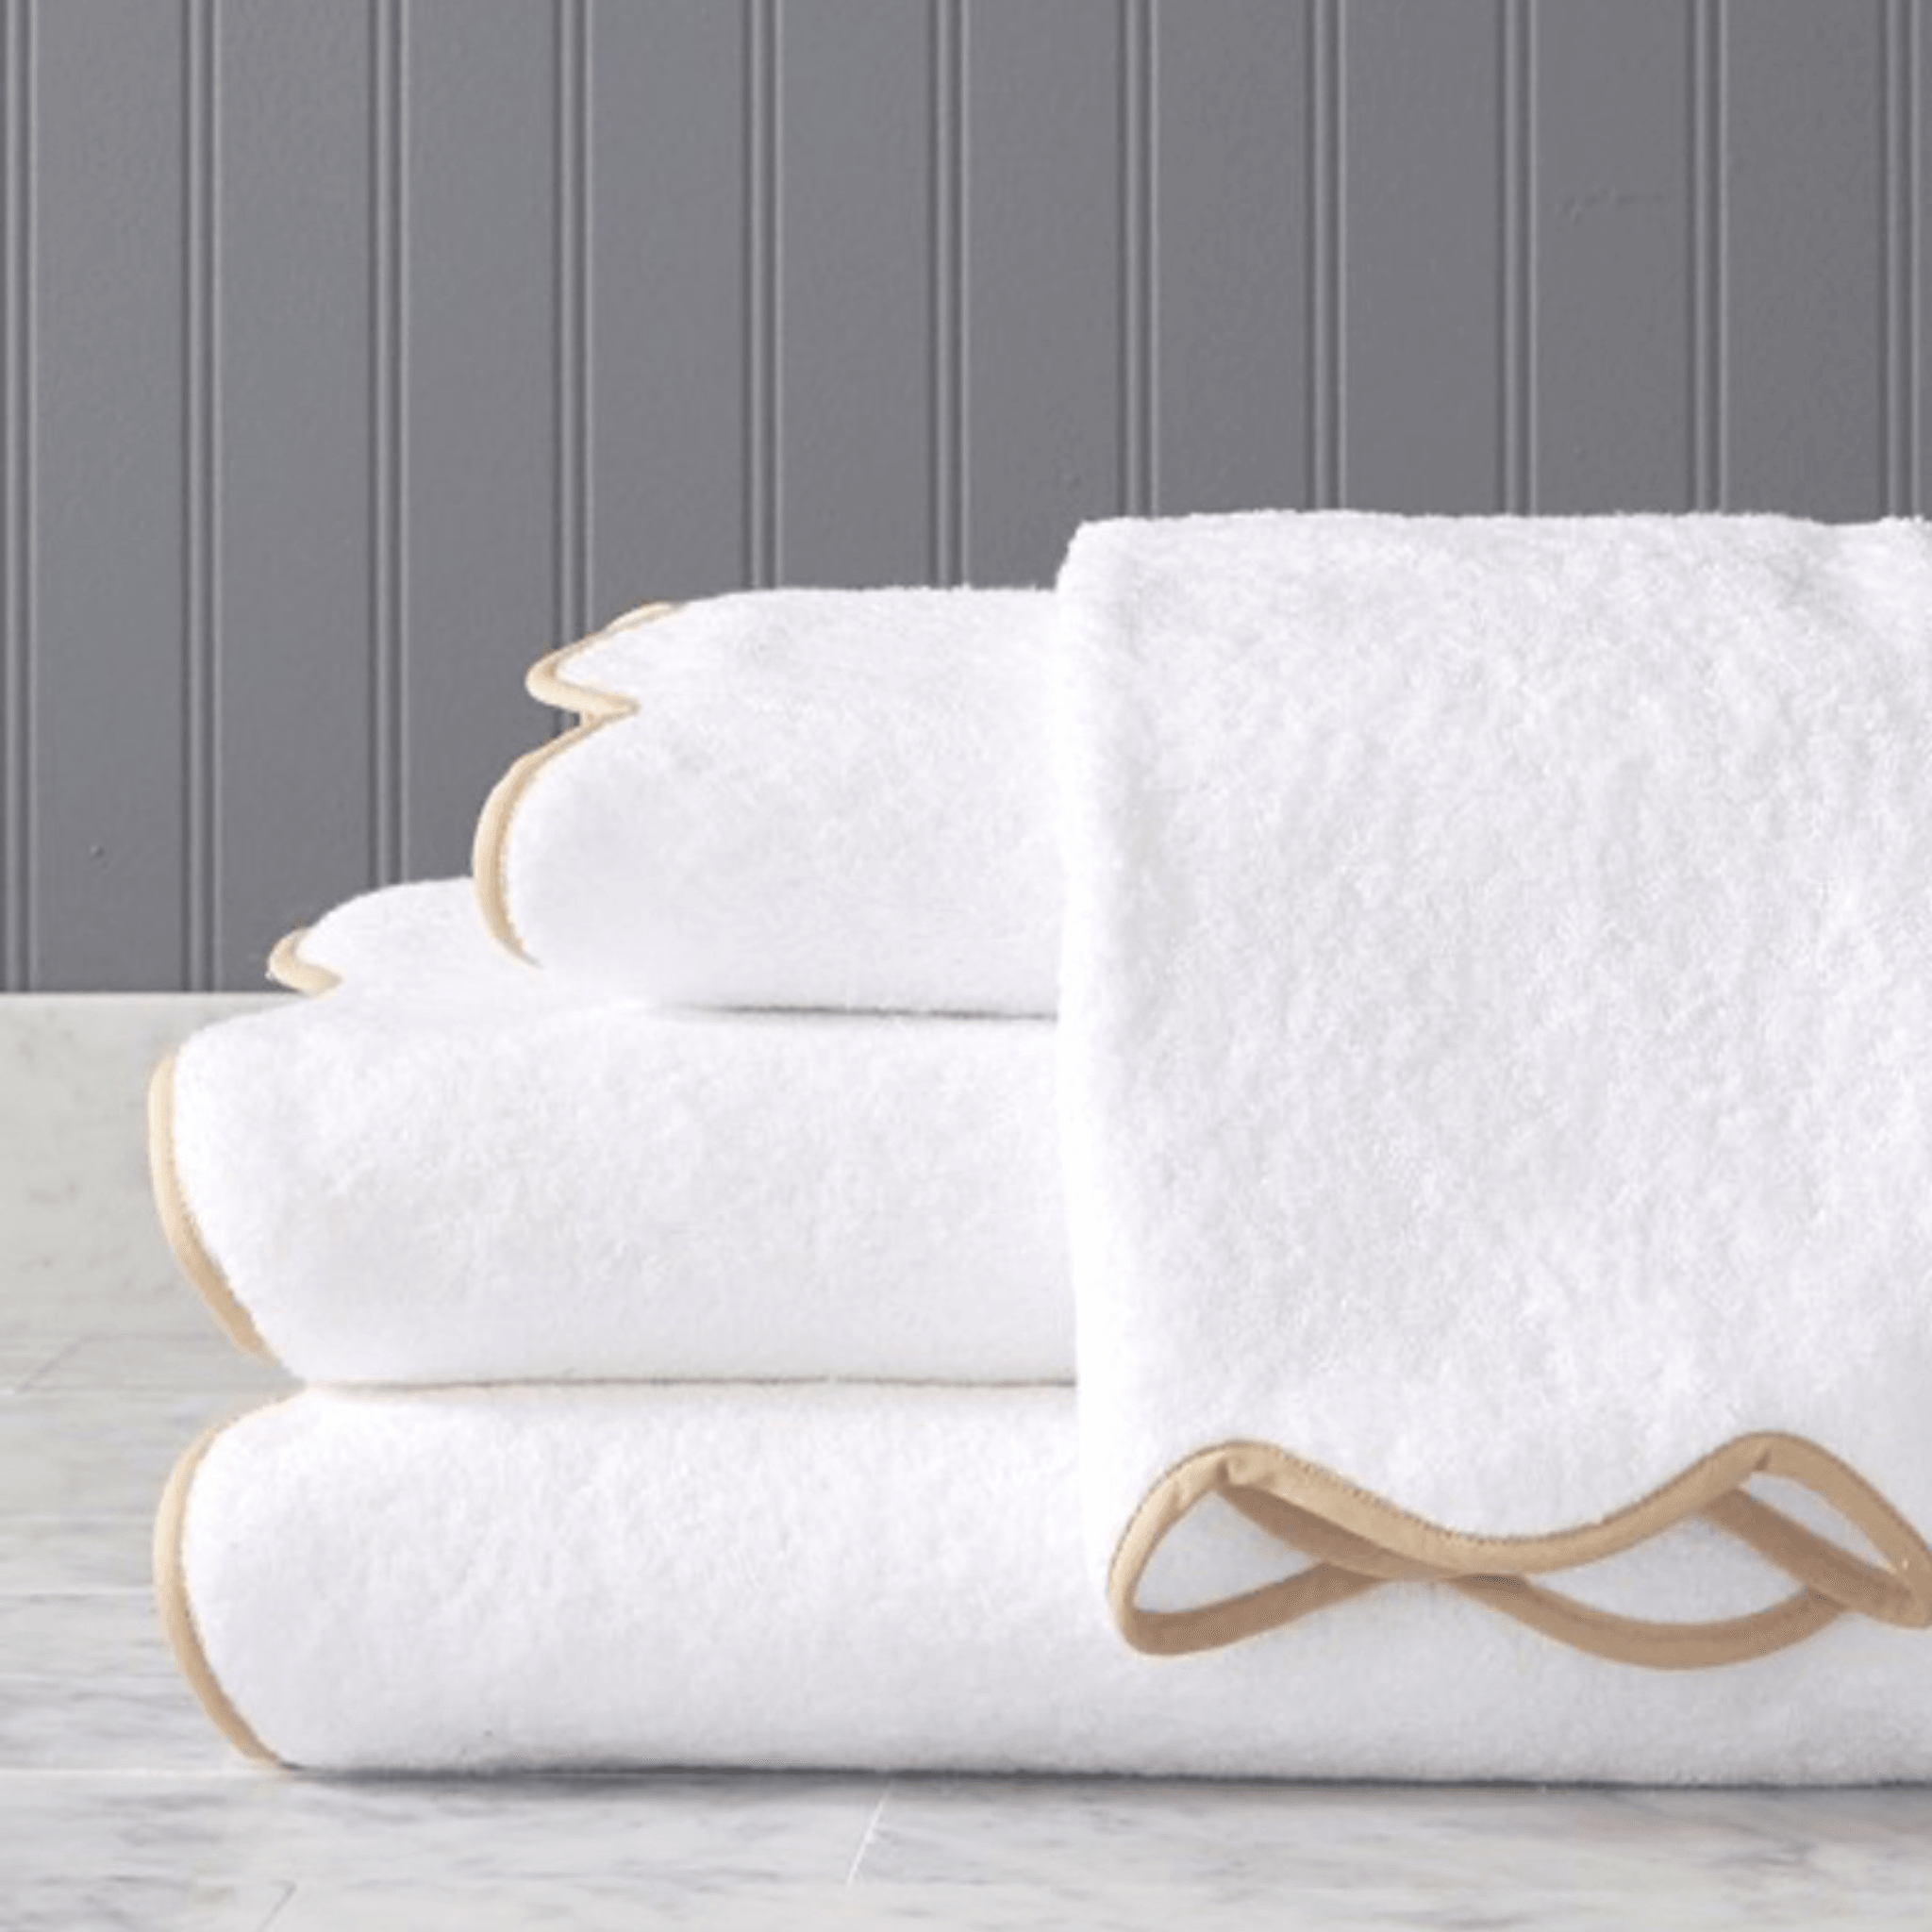 https://www.wellappointedhouse.com/cdn/shop/files/plush-devon-terry-scalloped-bath-towels-with-optional-monogram-available-in-a-variety-of-trim-colors-bath-towels-the-well-appointed-house-3_cbe13527-16db-4115-9065-05460128ccd8.png?v=1691670504